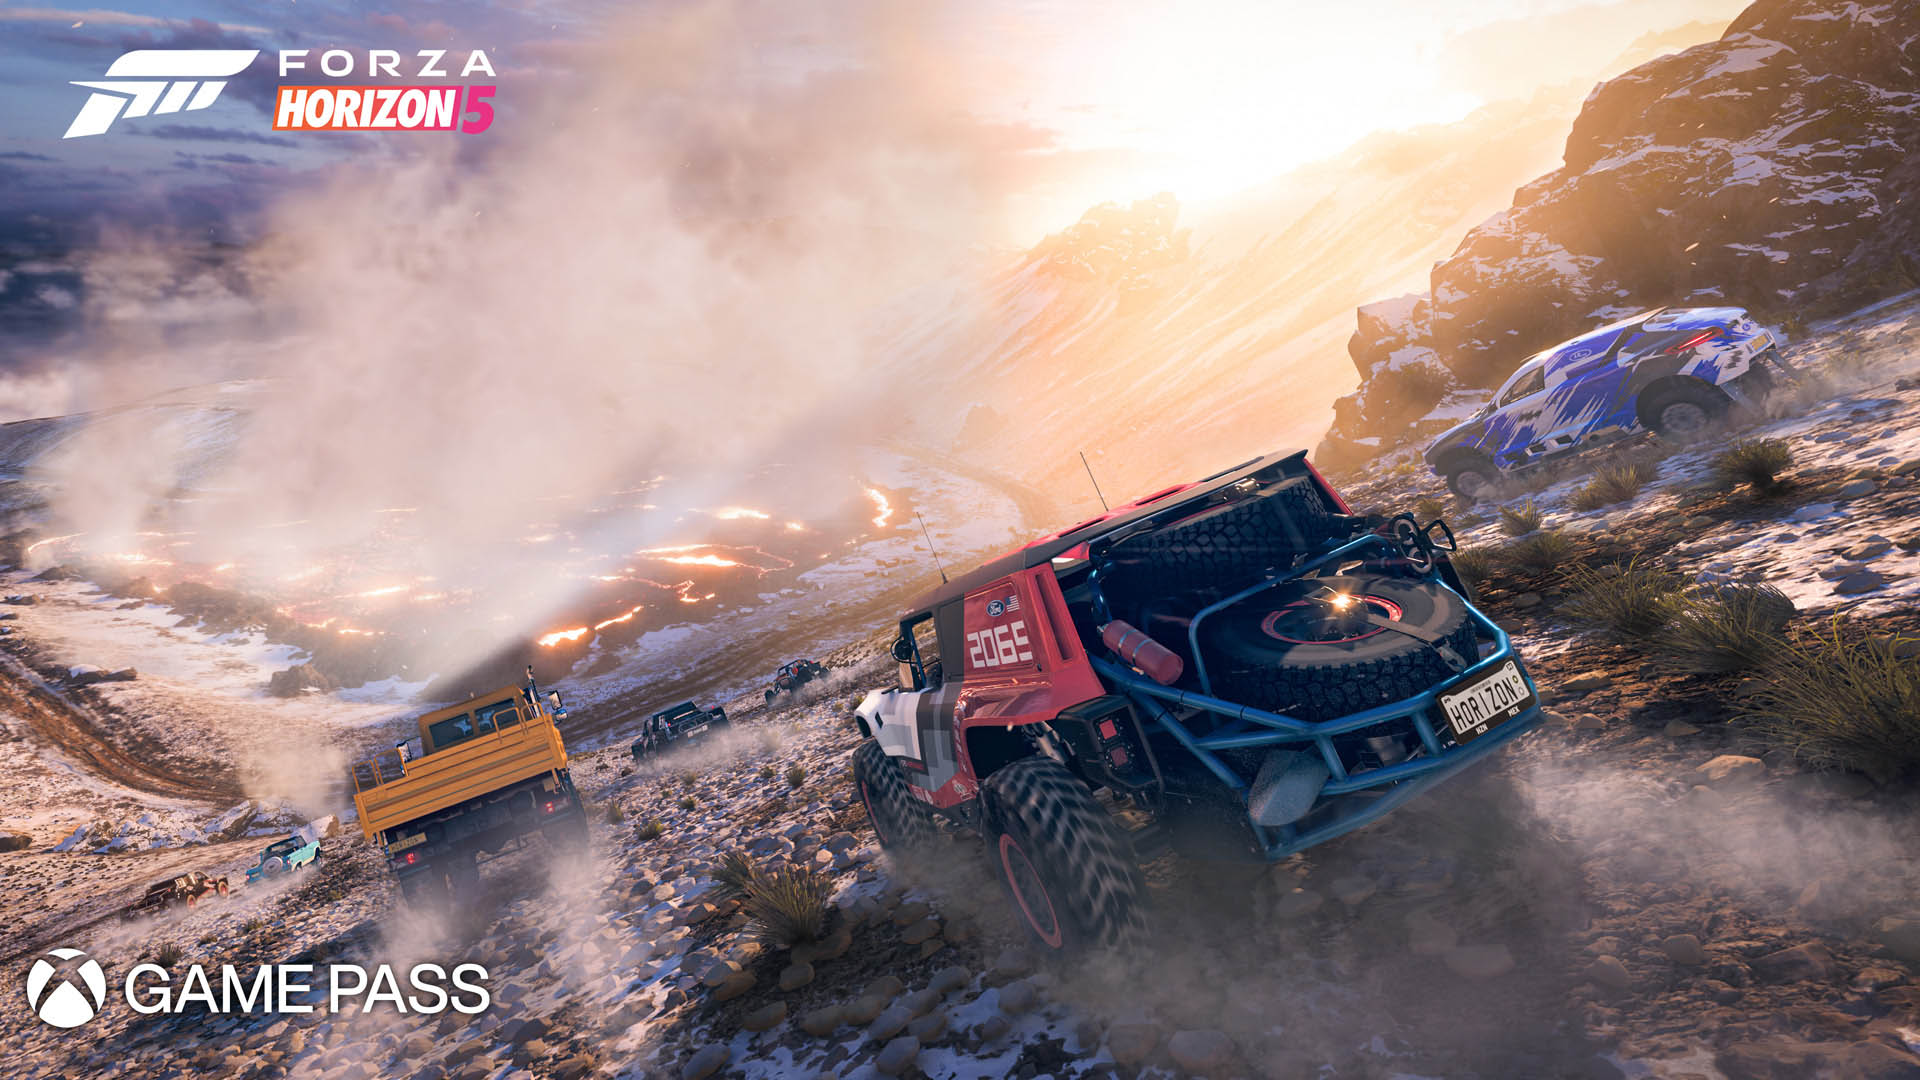 A promotional image for Xbox Game Pass and Forza Horizon 5, showing trucks racing offroad through a sandy desert.